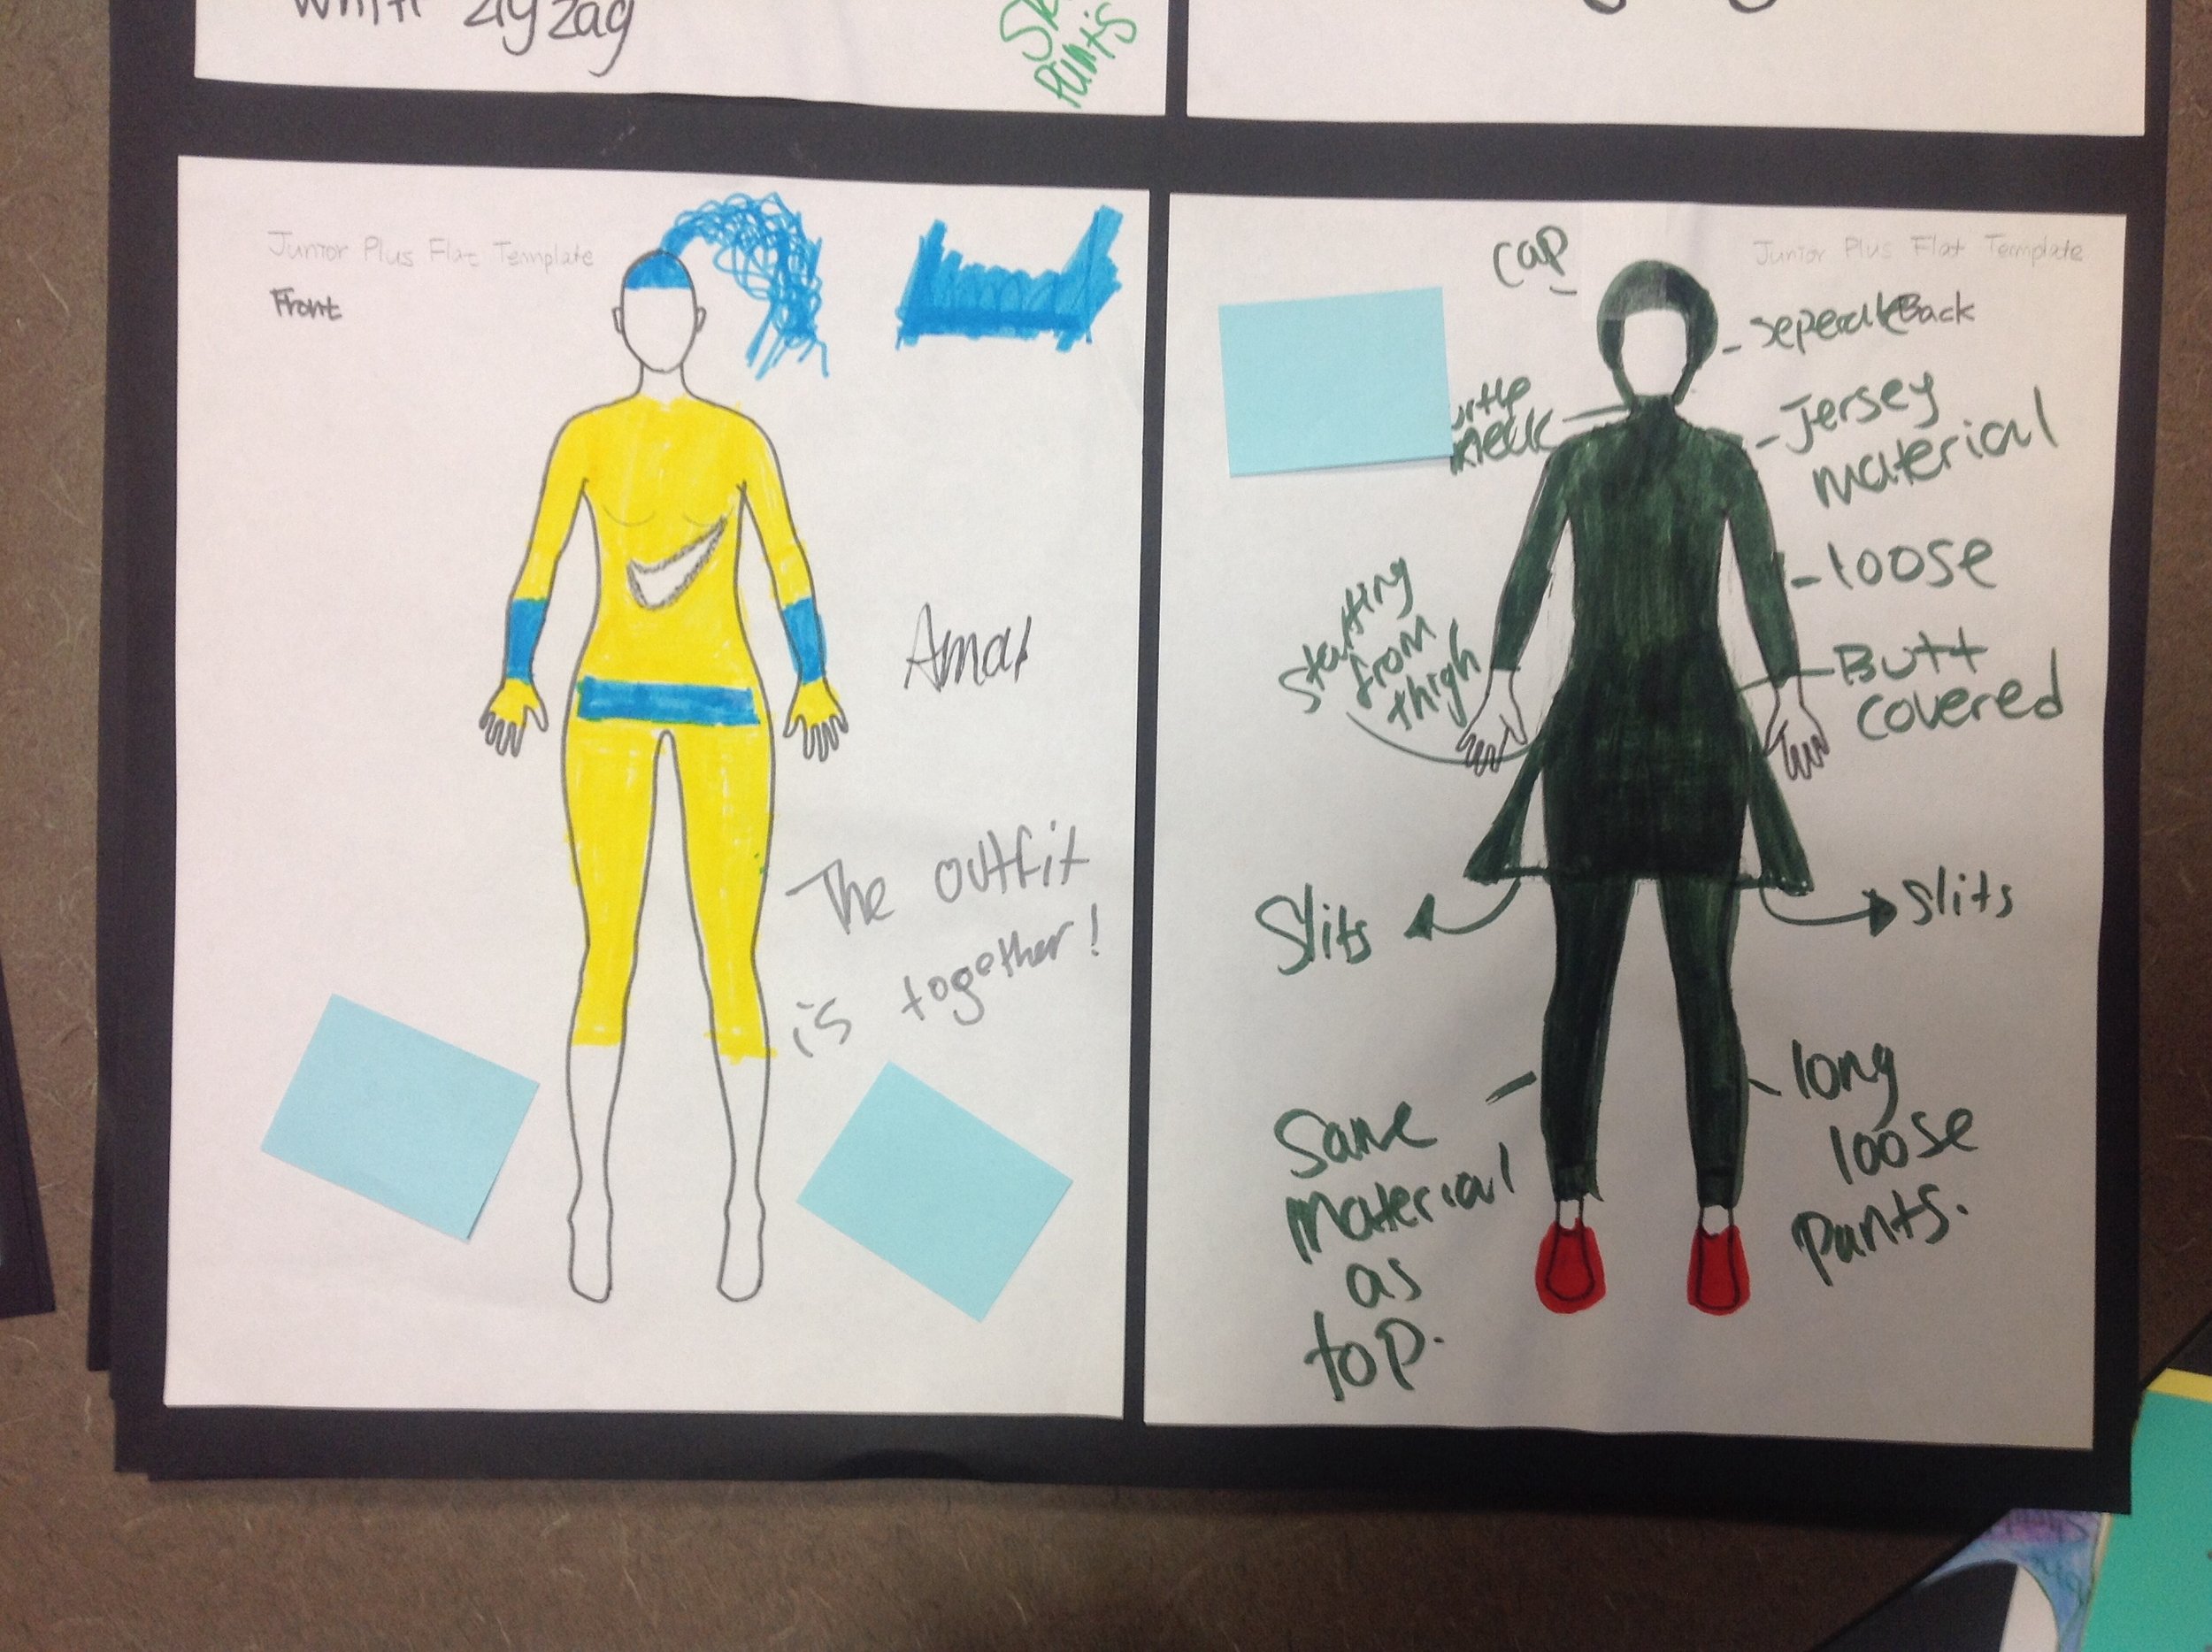  Vote!!! Once initial activewear designs were developed, the girl on the project team voted for their favorite croquis. 